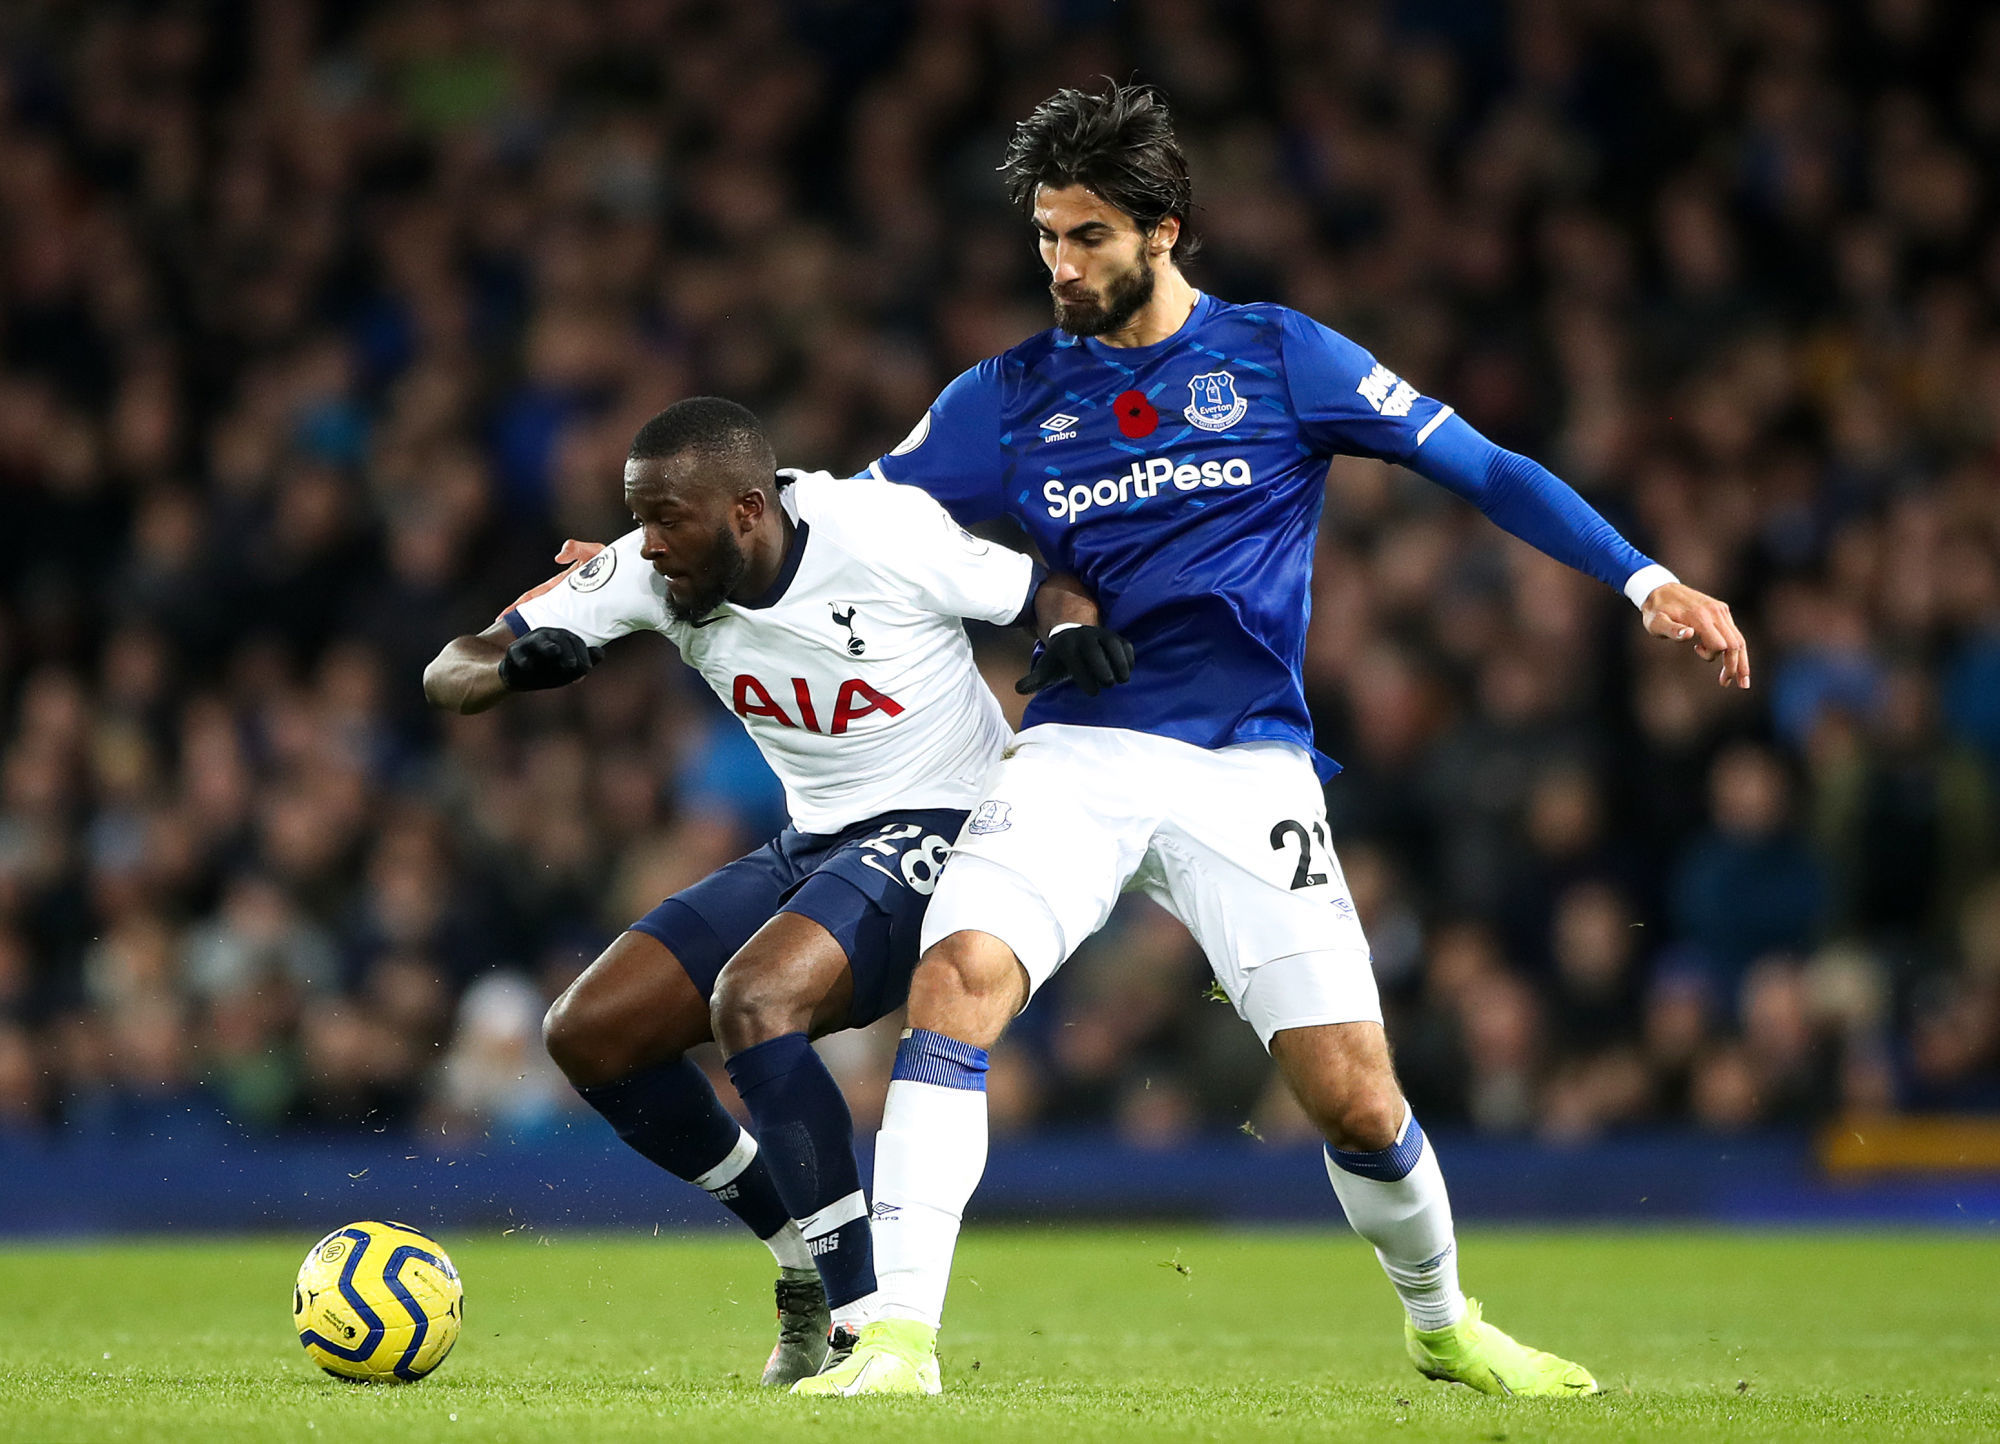 Tottenham Hotspur's Tanguy Ndombele (left) and Everton's Andre Gomes battle for the ball during the Premier League match at Goodison Park, Liverpool. 
Photo by Icon Sport - Tanguy NDOMBELE - Andre GOMES - Goodison Park  - Liverpool (Angleterre)